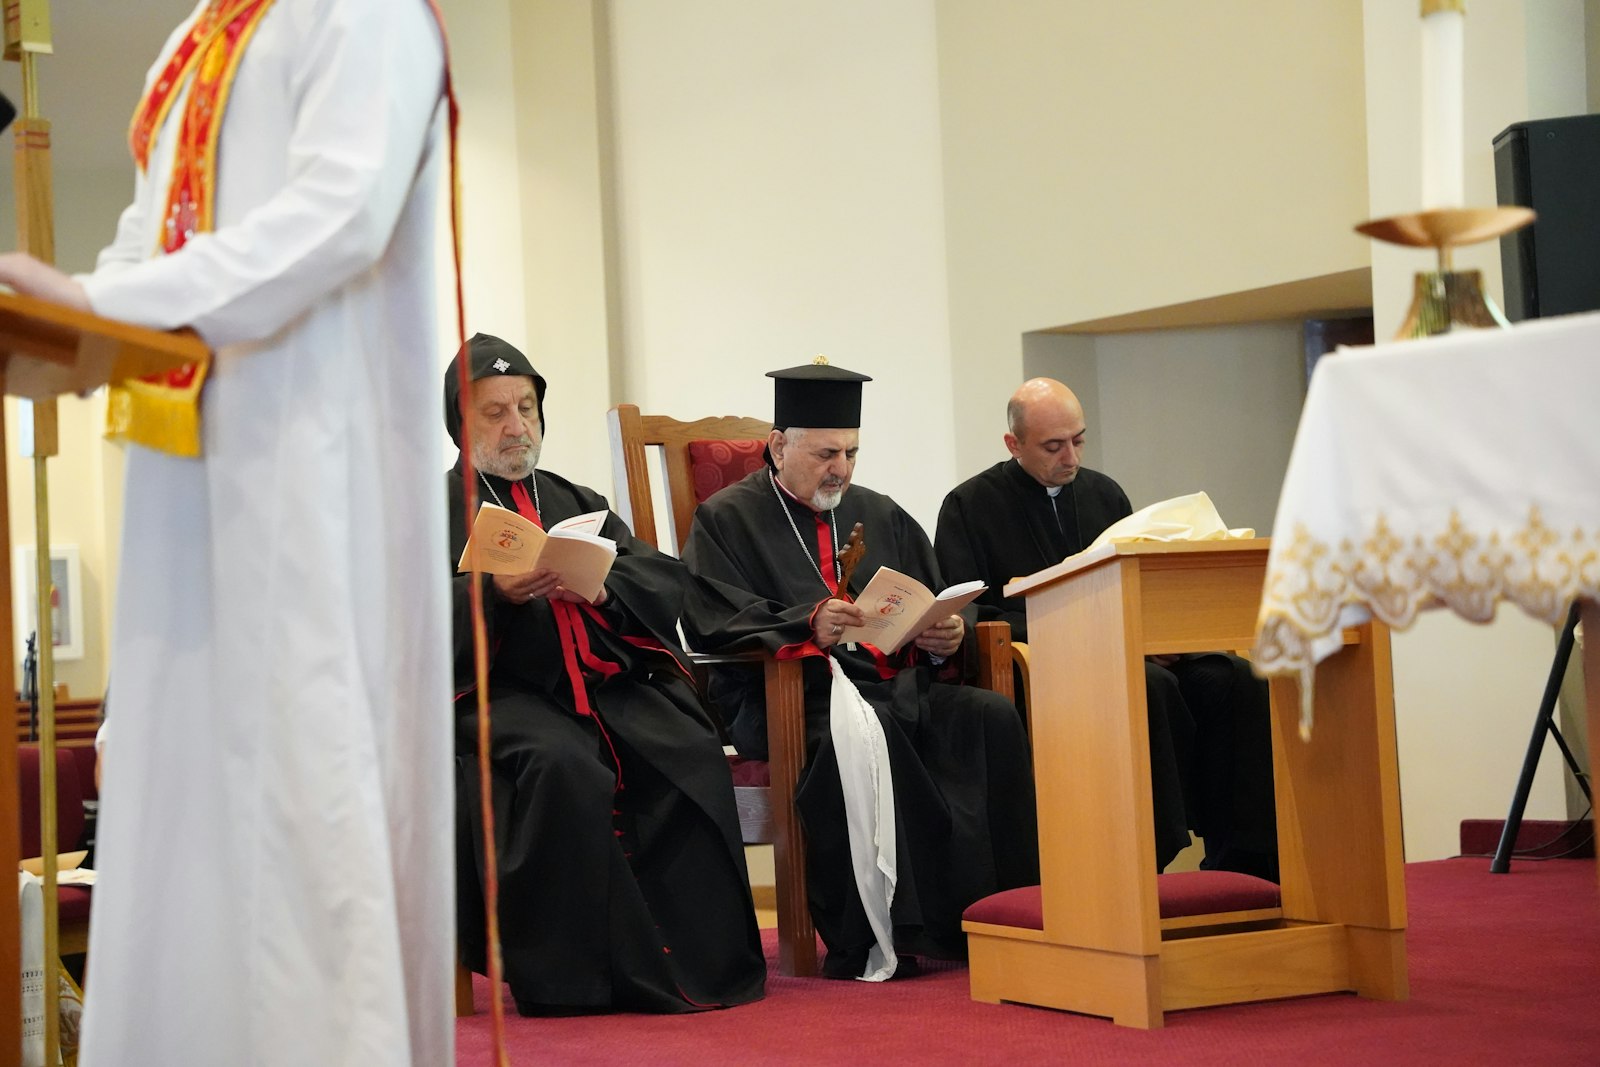 Syriac Patriarch Ignatius Joseph III Younan joined Bishop Habash on the first day of the 12th Syriac Catholic Youth Convention at St. Toma Syriac Cathedral in Farmington Hills. “Jesus wants us to listen to each other, to open our hearts to the difficulties and the cries we all face, the temptations we all face,” Patriarch Younan said.